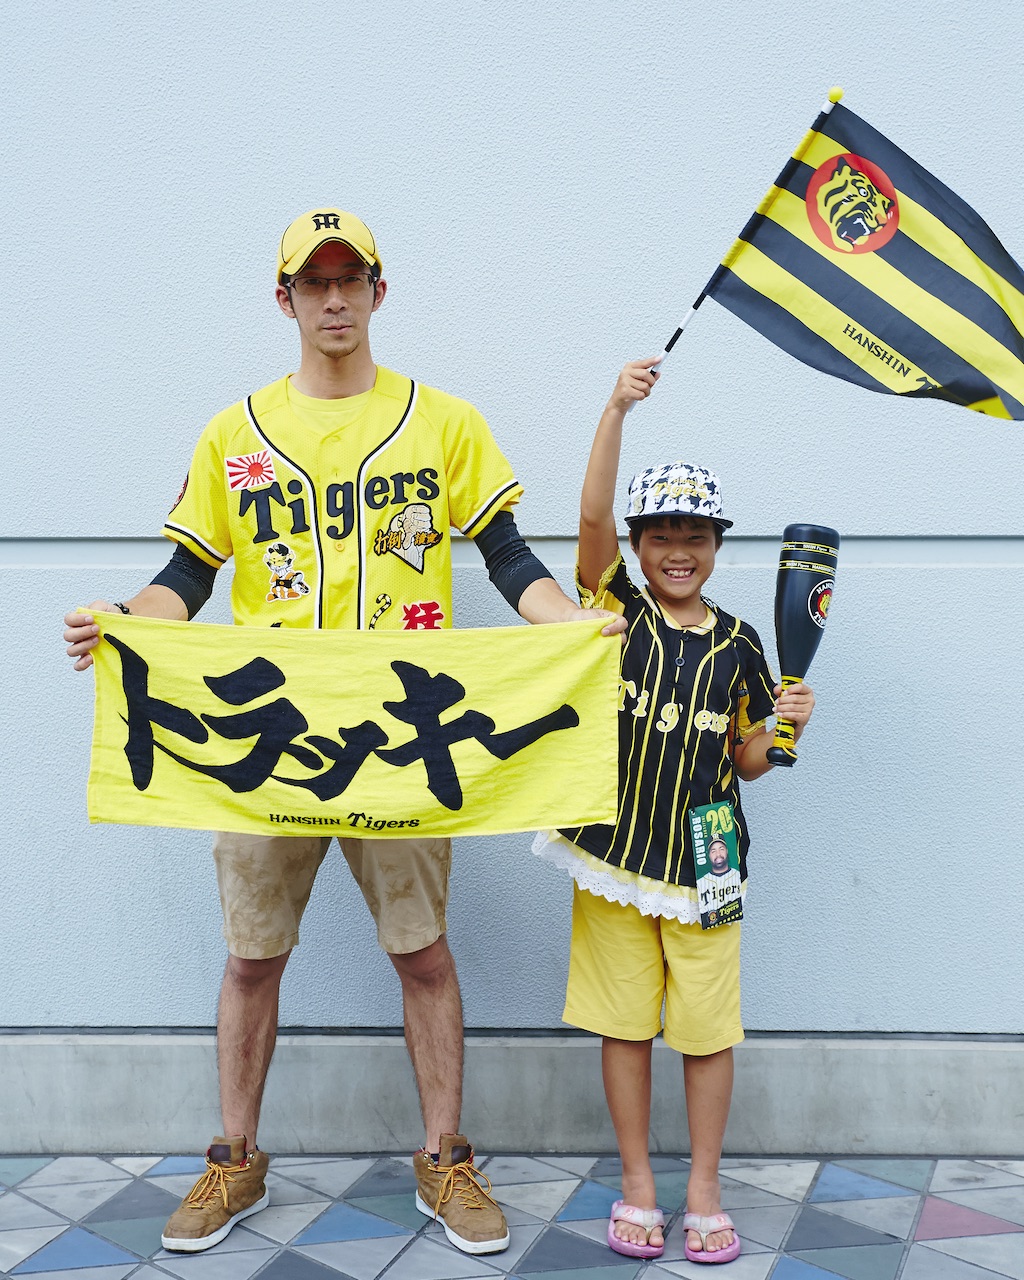 Supporters of the Hanshin Tigers